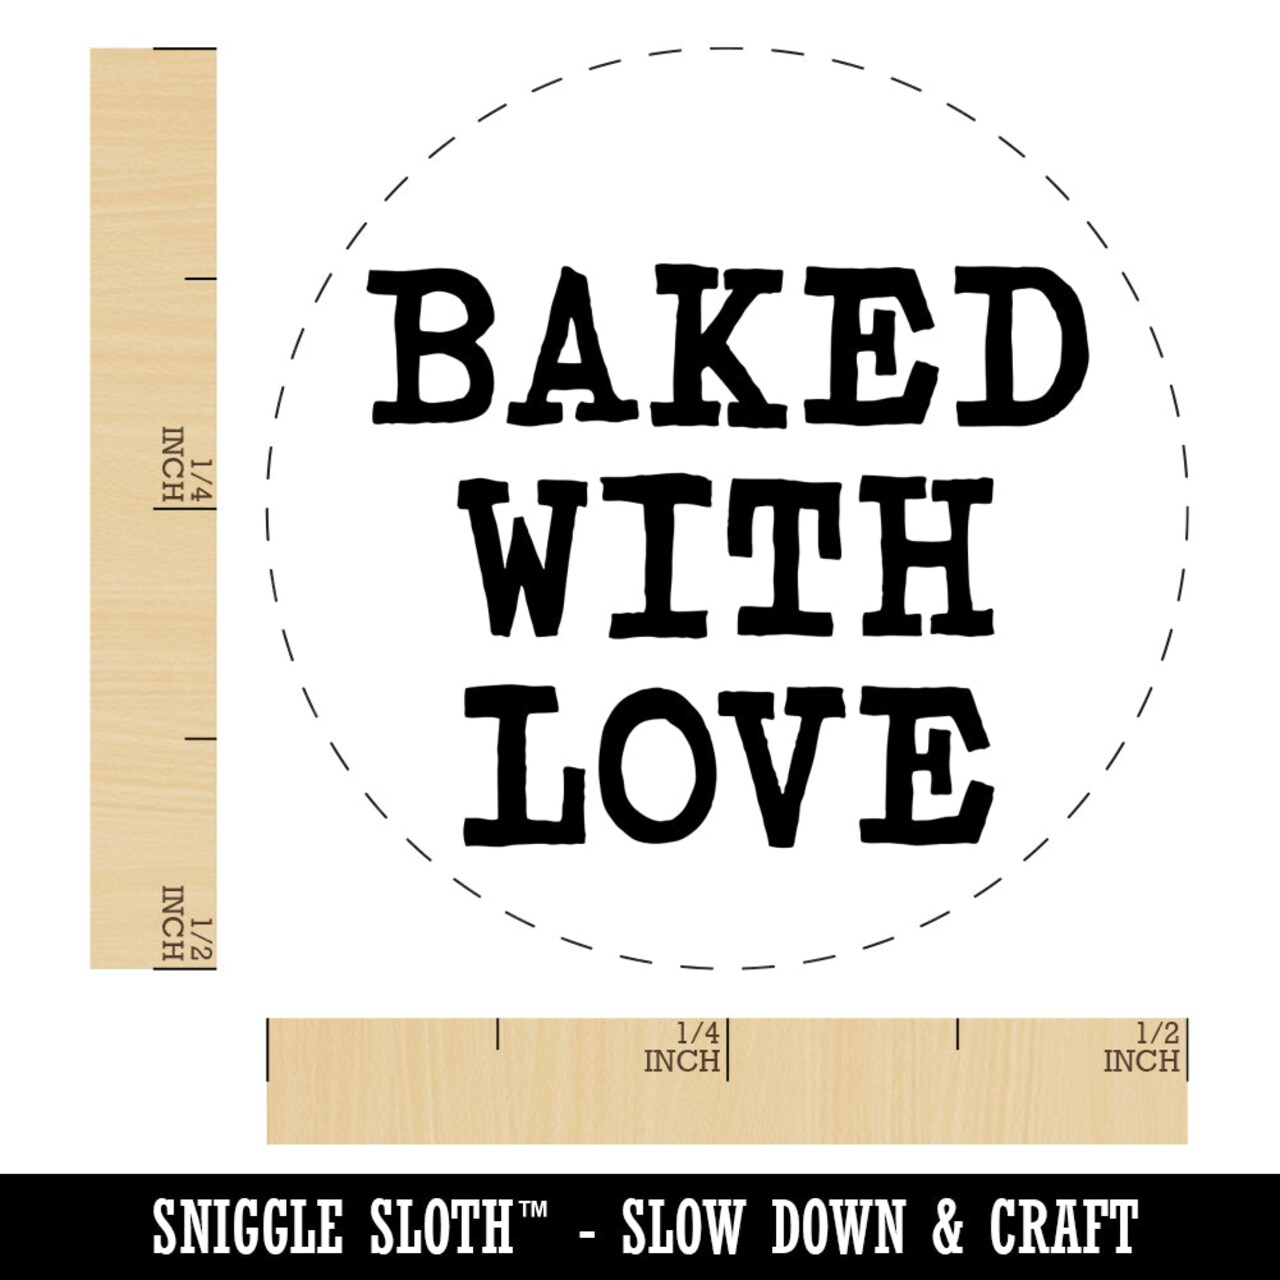 Baked with Love Fun Text Self-Inking Rubber Stamp for Stamping Crafting Planners